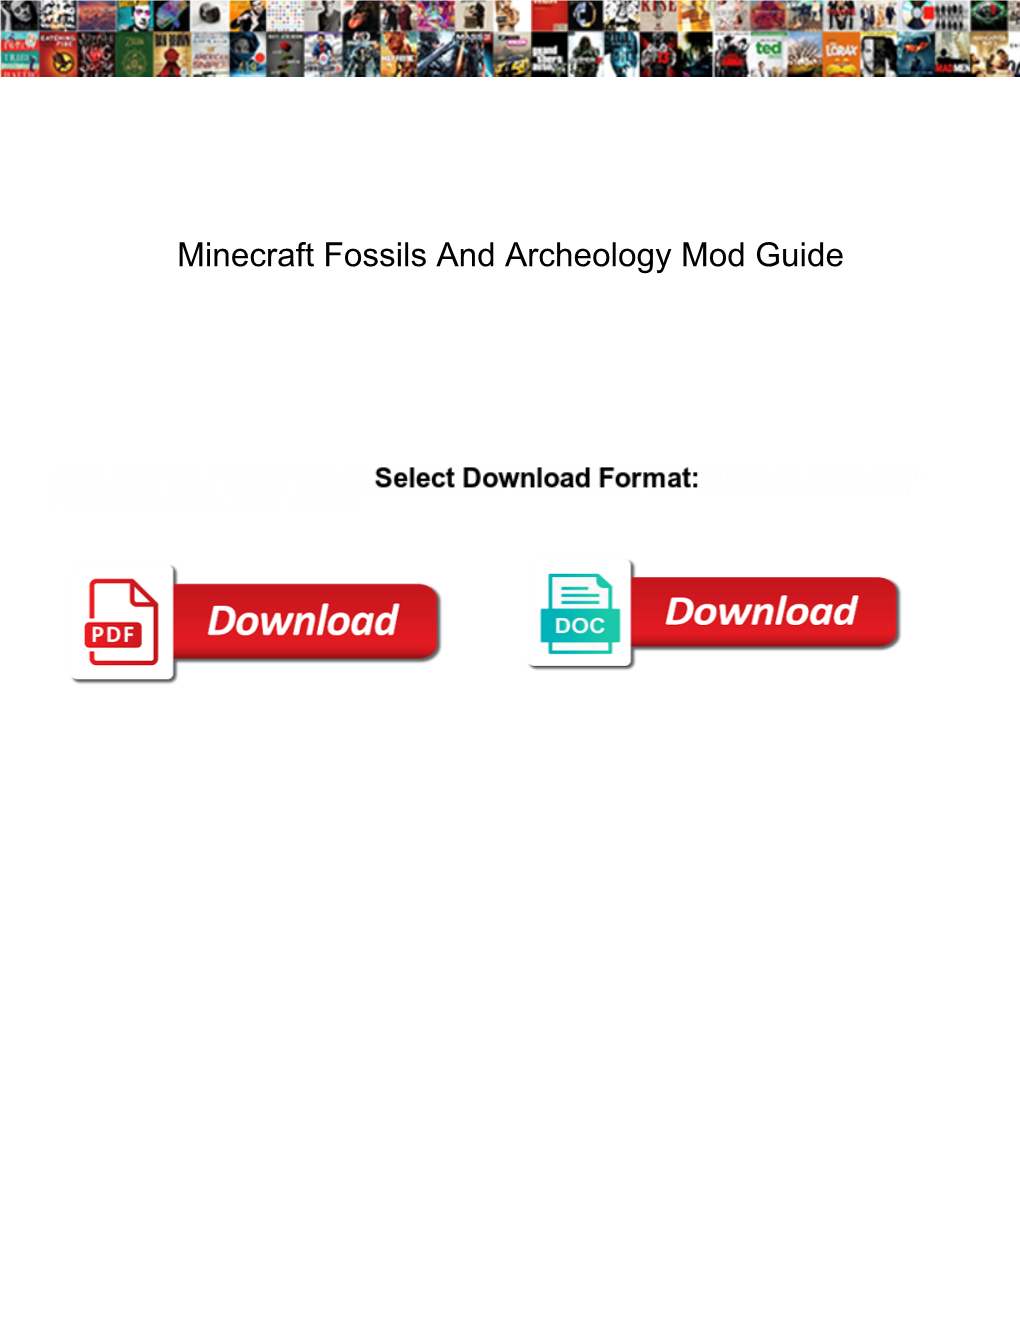 Minecraft Fossils and Archeology Mod Guide